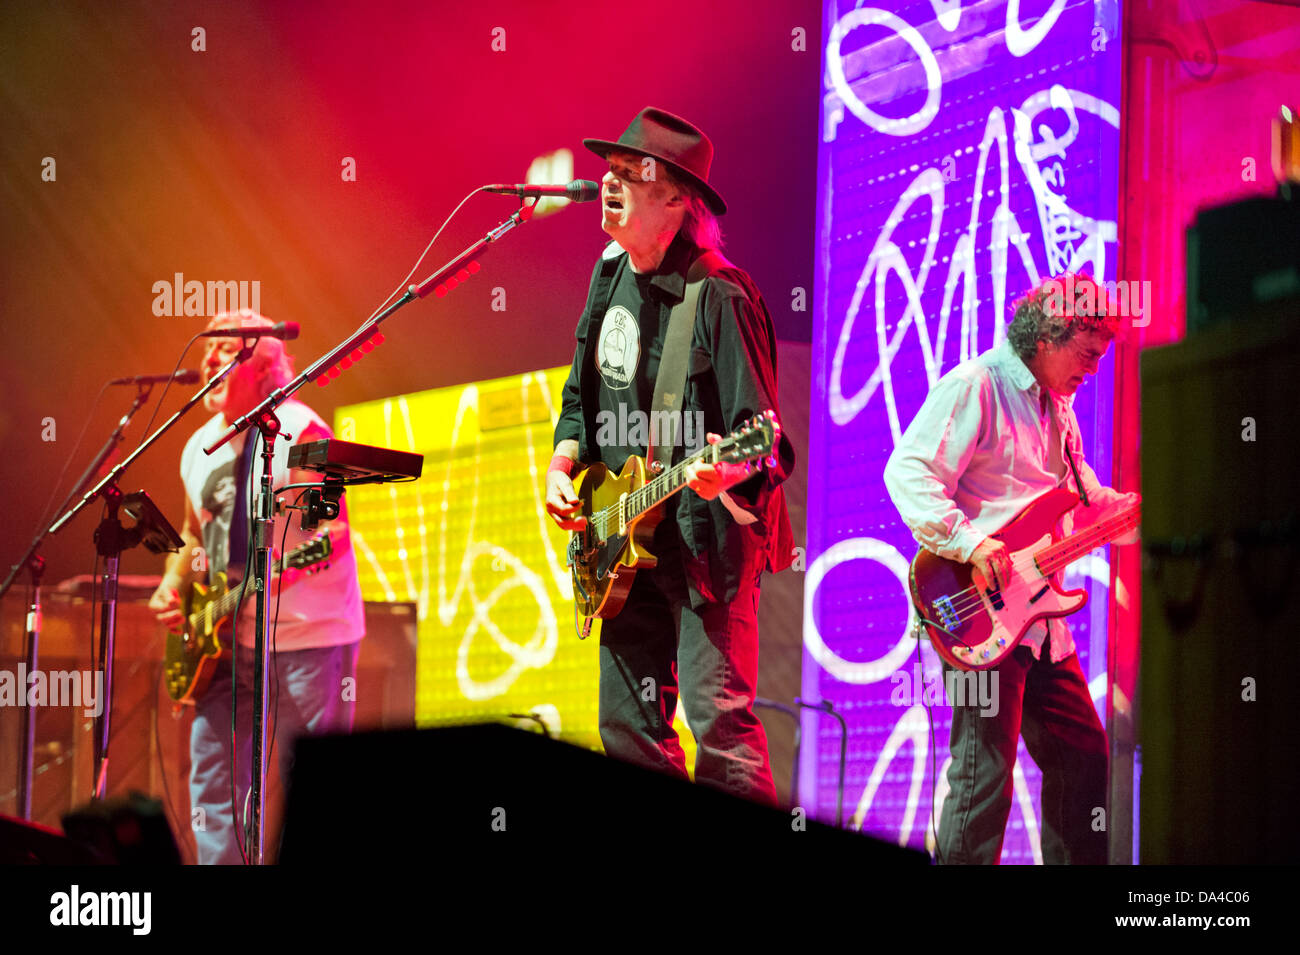 Neil Young and Crazy Horse (Frank Sampedro, guitar, Billy Talbot, bass) in concert at the NEC Birmingham UK, 11 June 2013 Stock Photo